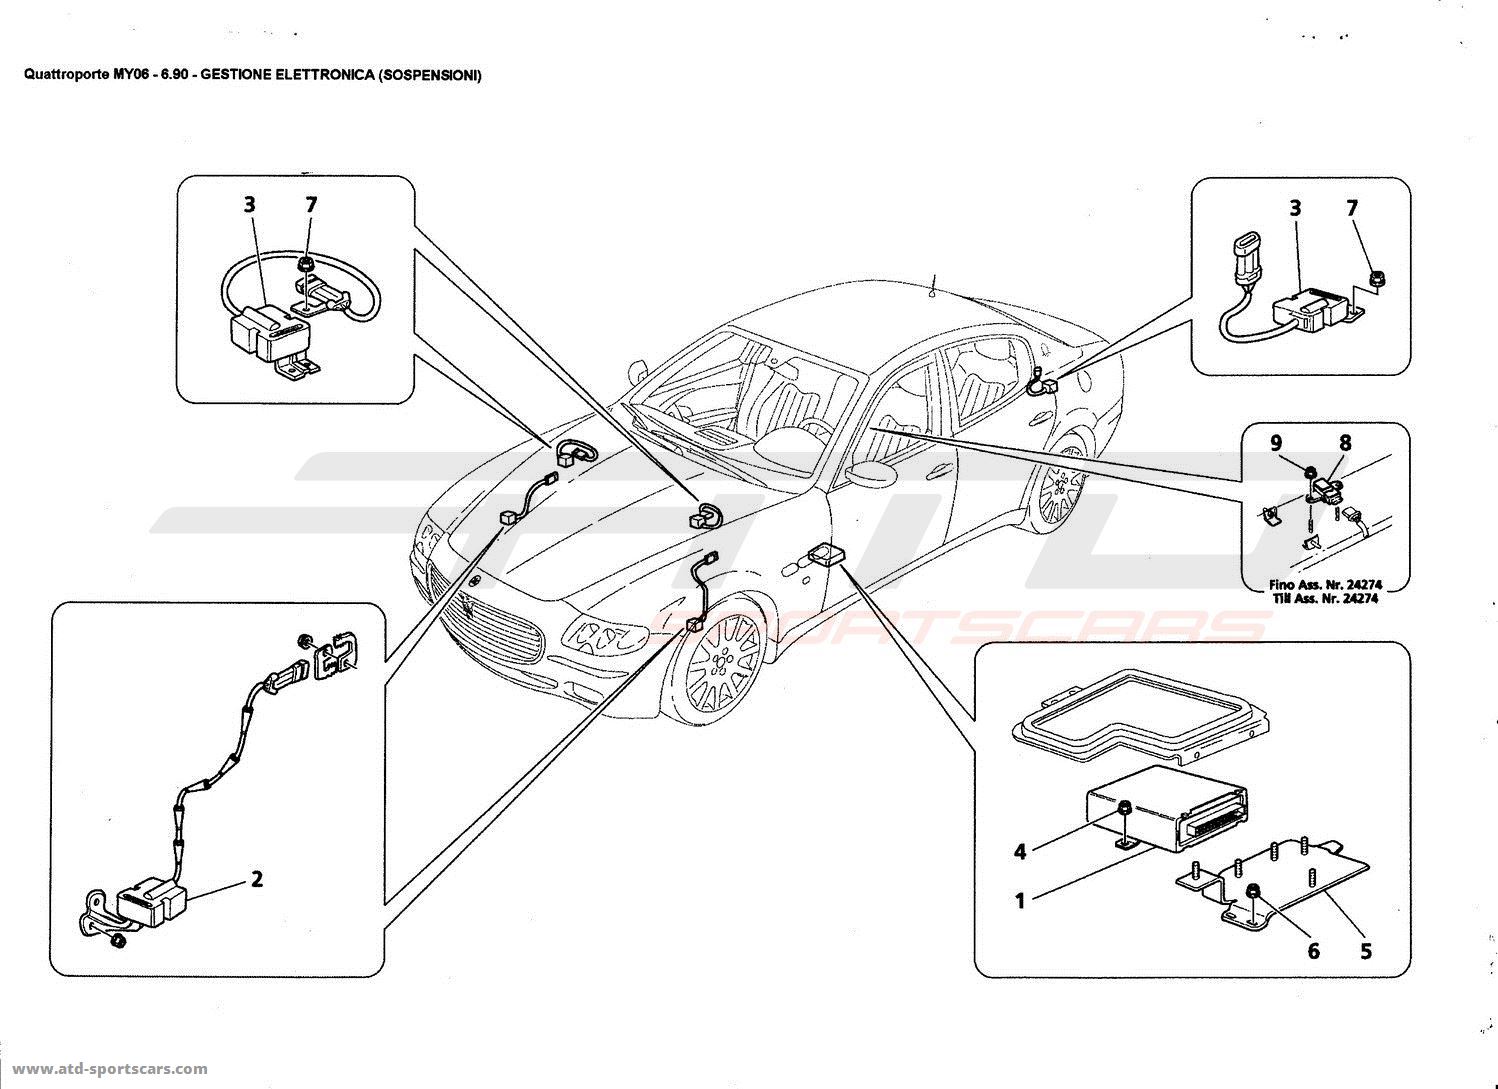 ELECTRONIC CONTROLS (SUSPENSIONS)